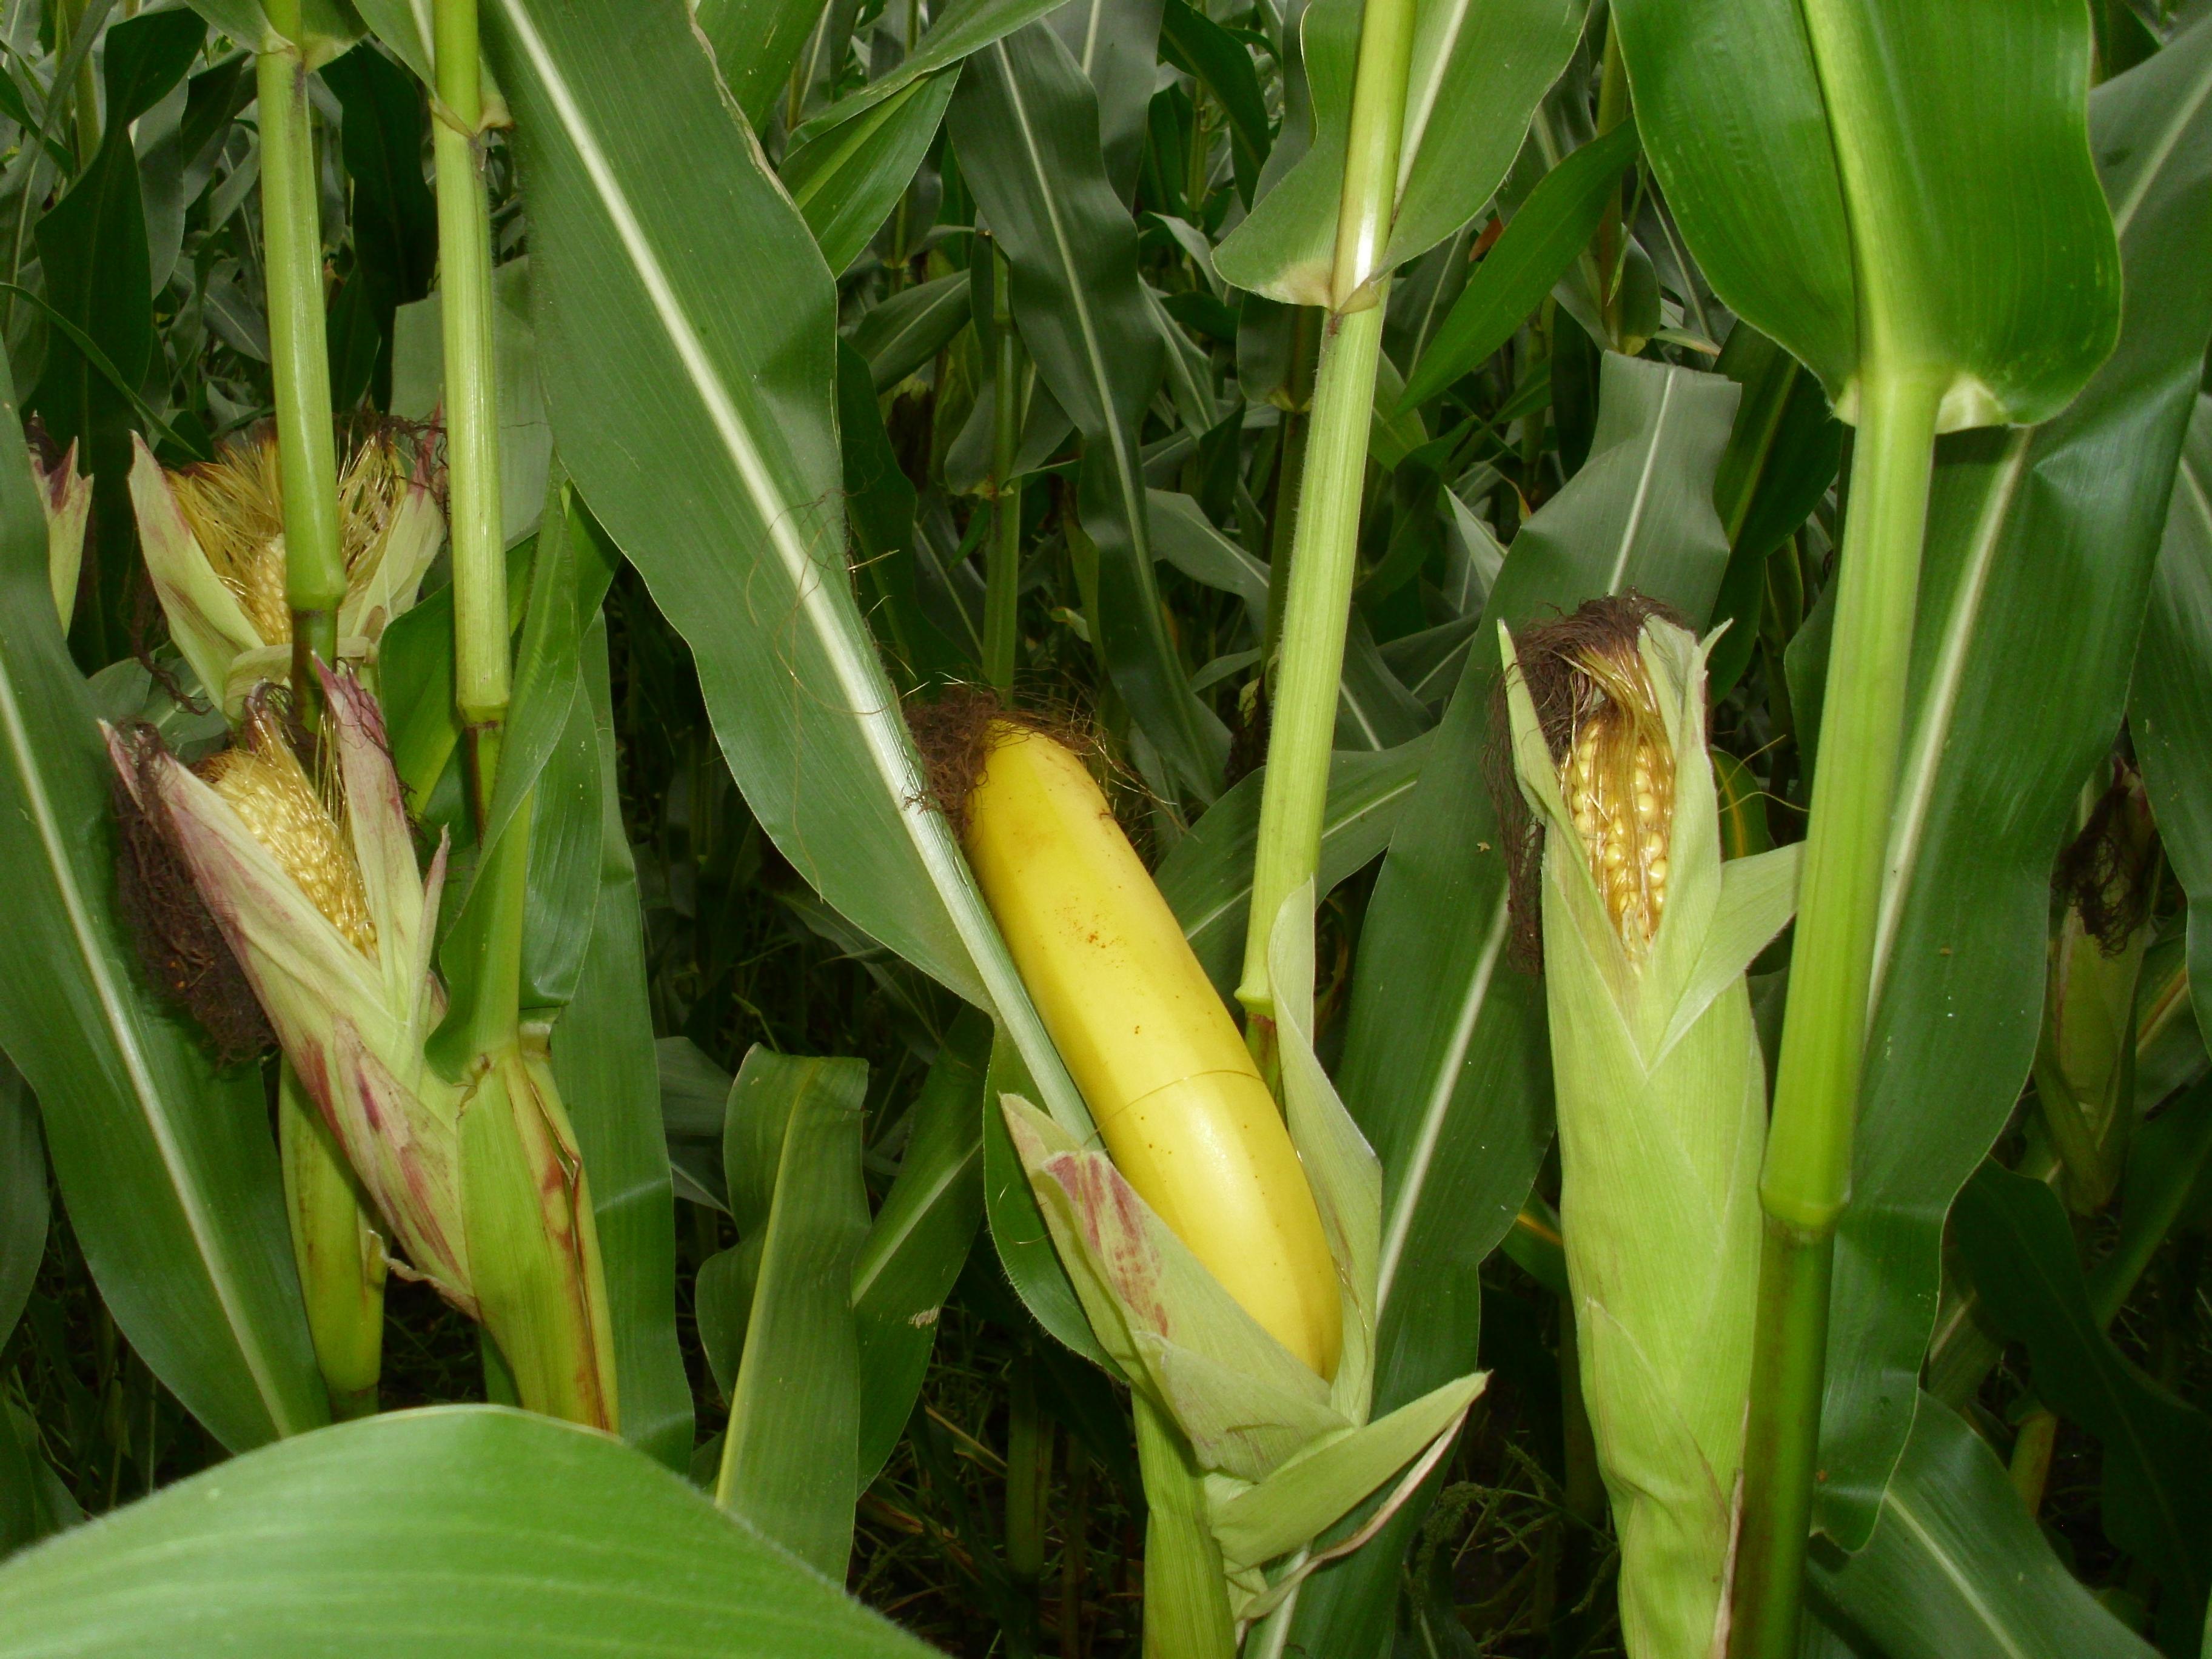 Why Corn Ethanol is Bad for the Environment